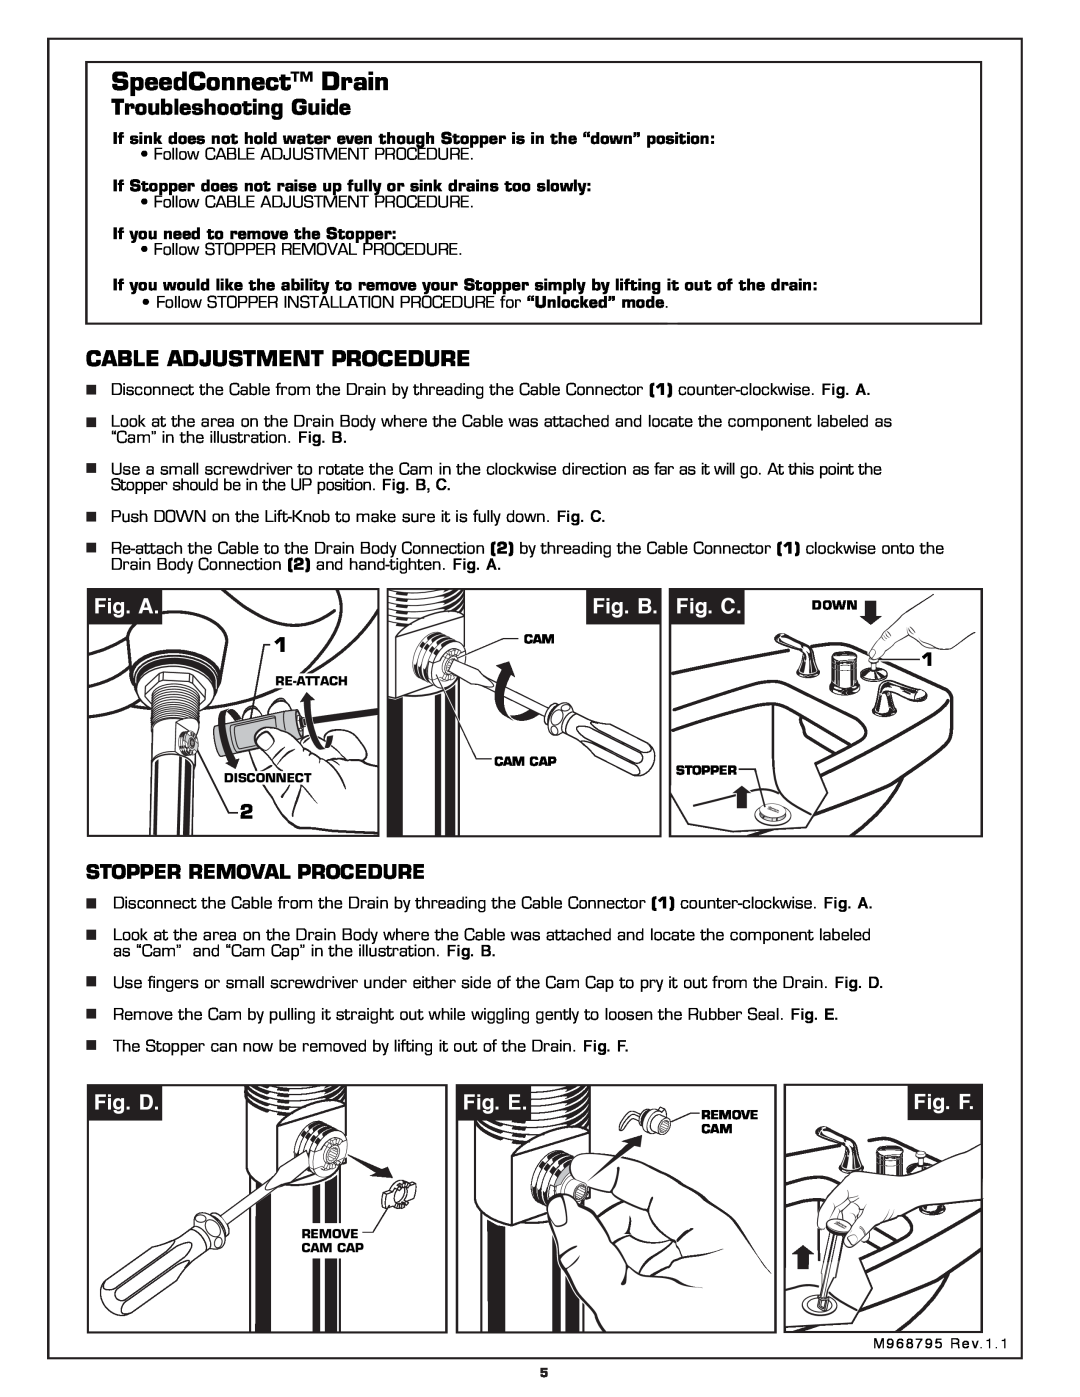 American Standard 3475.500 SpeedConnect Drain, Troubleshooting Guide, Cable Adjustment Procedure, Fig. A, Fig. B, Fig. C 